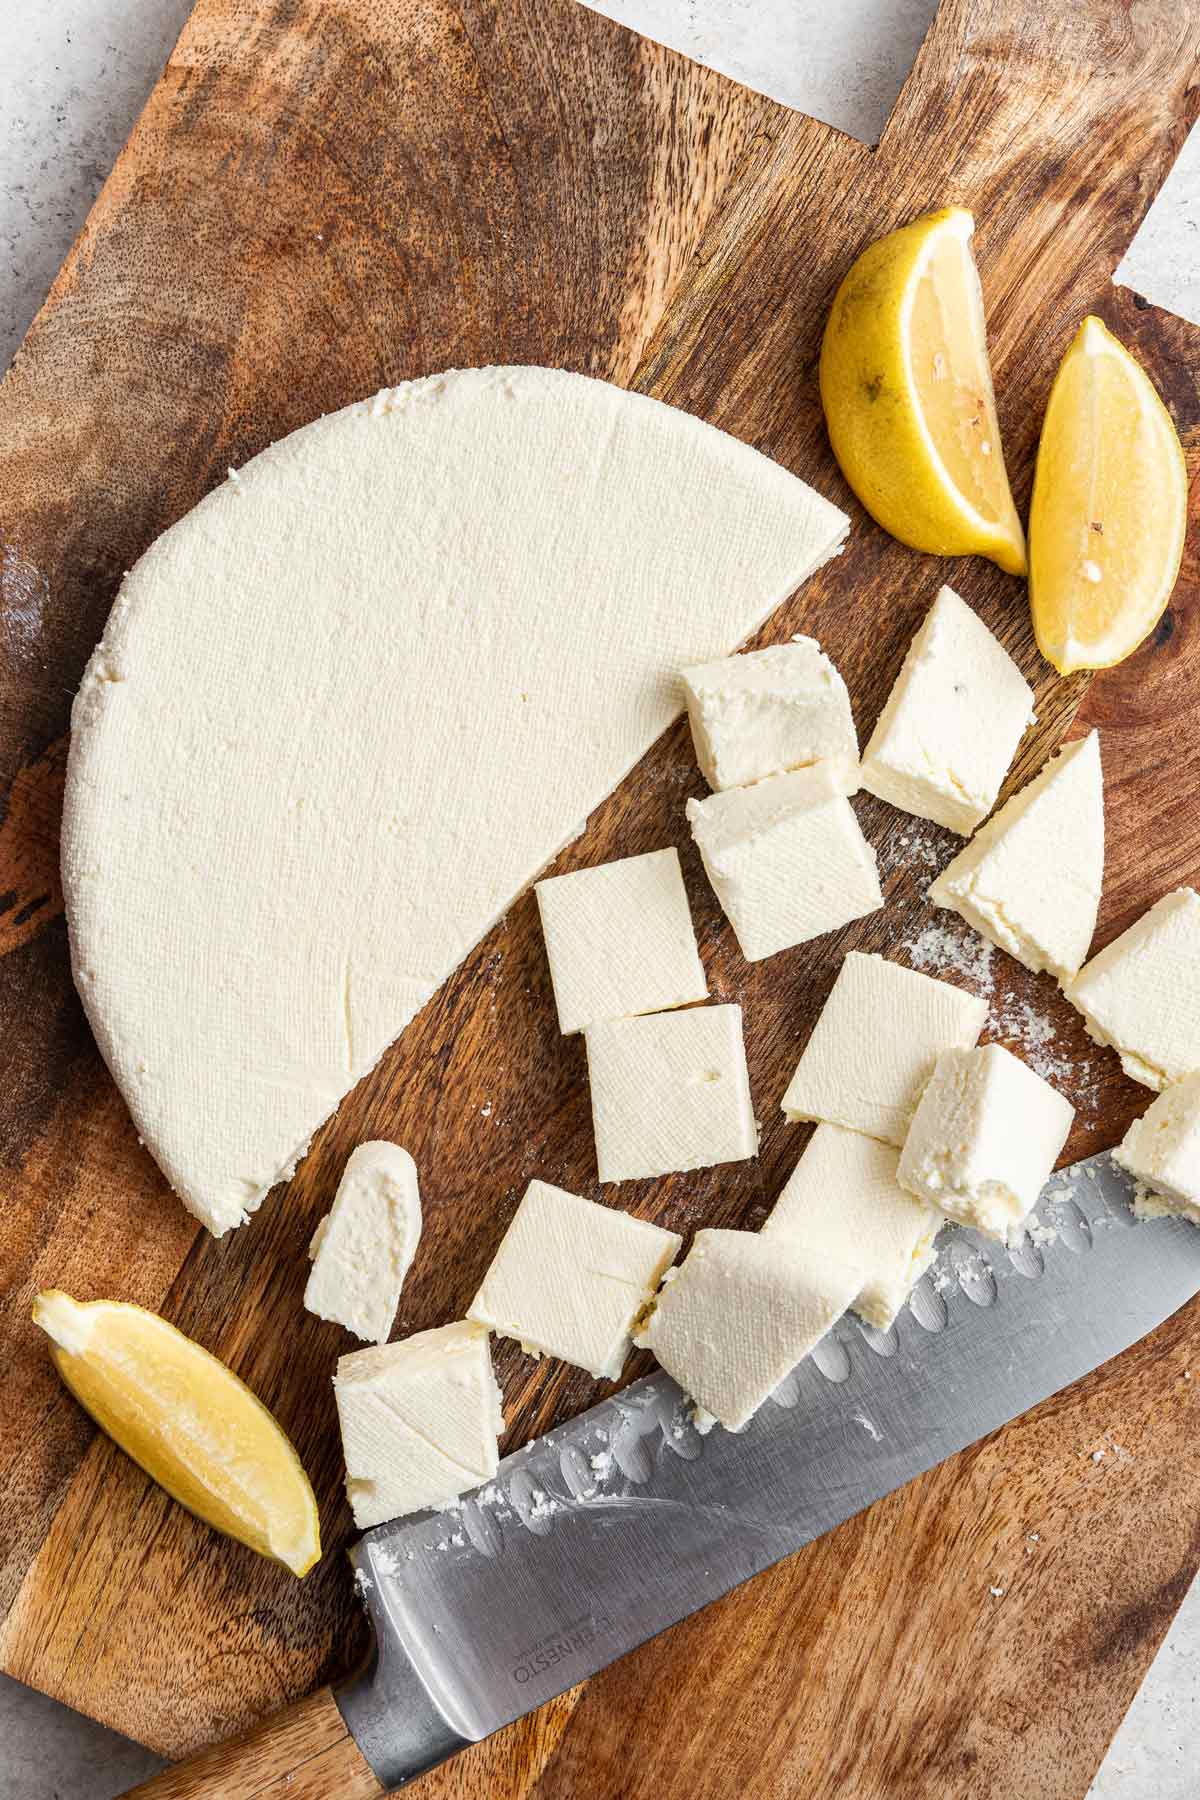 Paneer block of cheese with half of the cheese cut into smaller pieces on a wooden cutting board. 